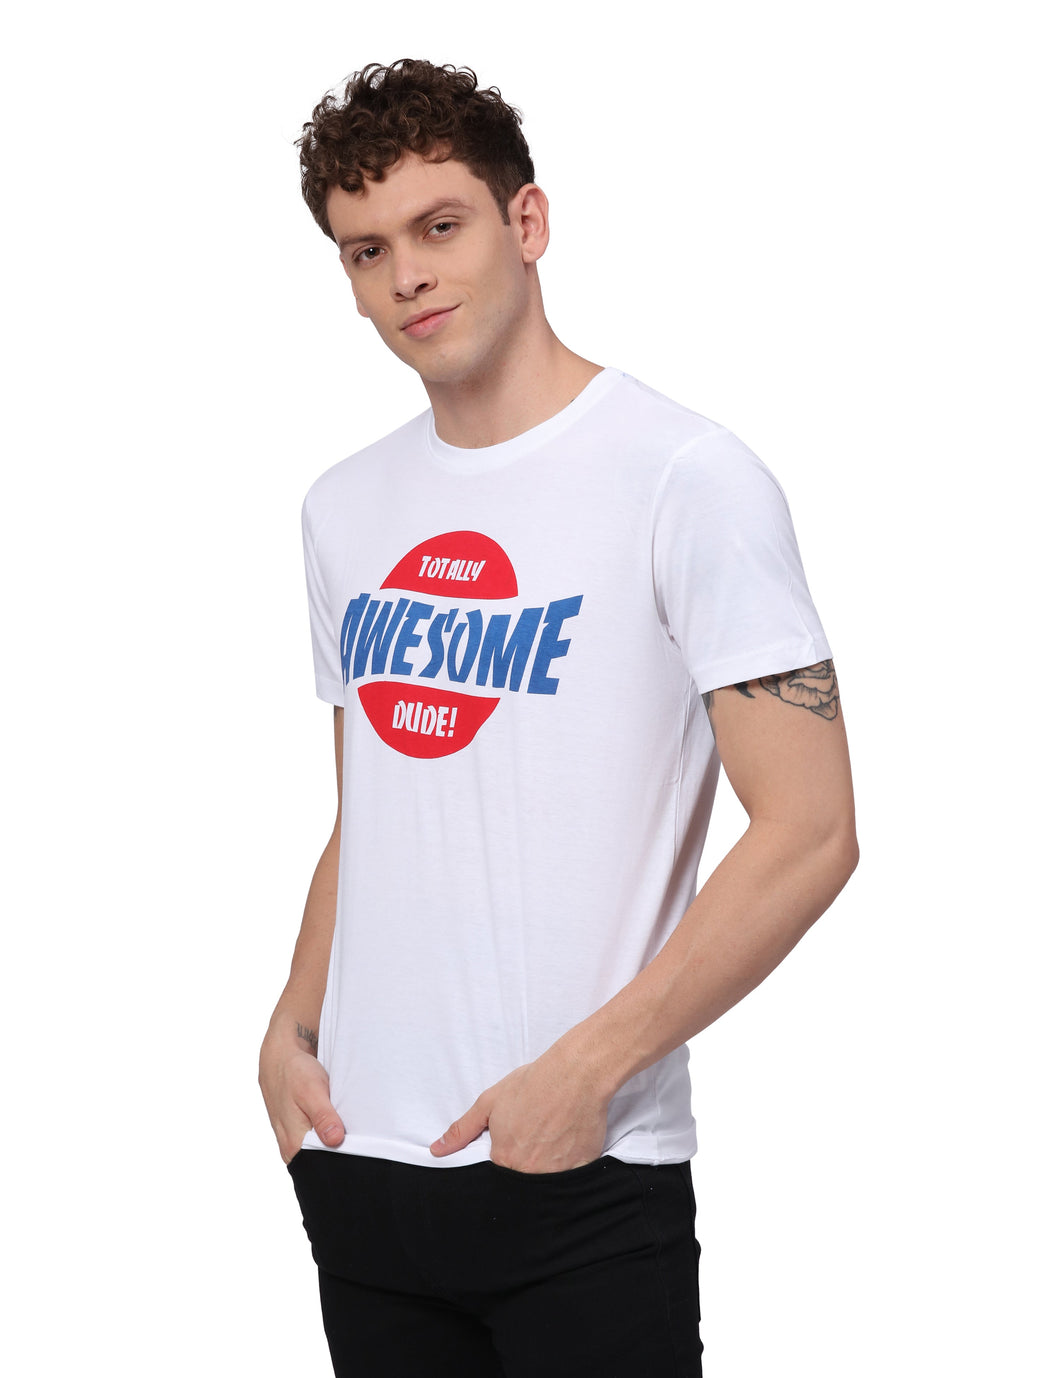 Awesome Tee T-Shirts www.epysode.in 